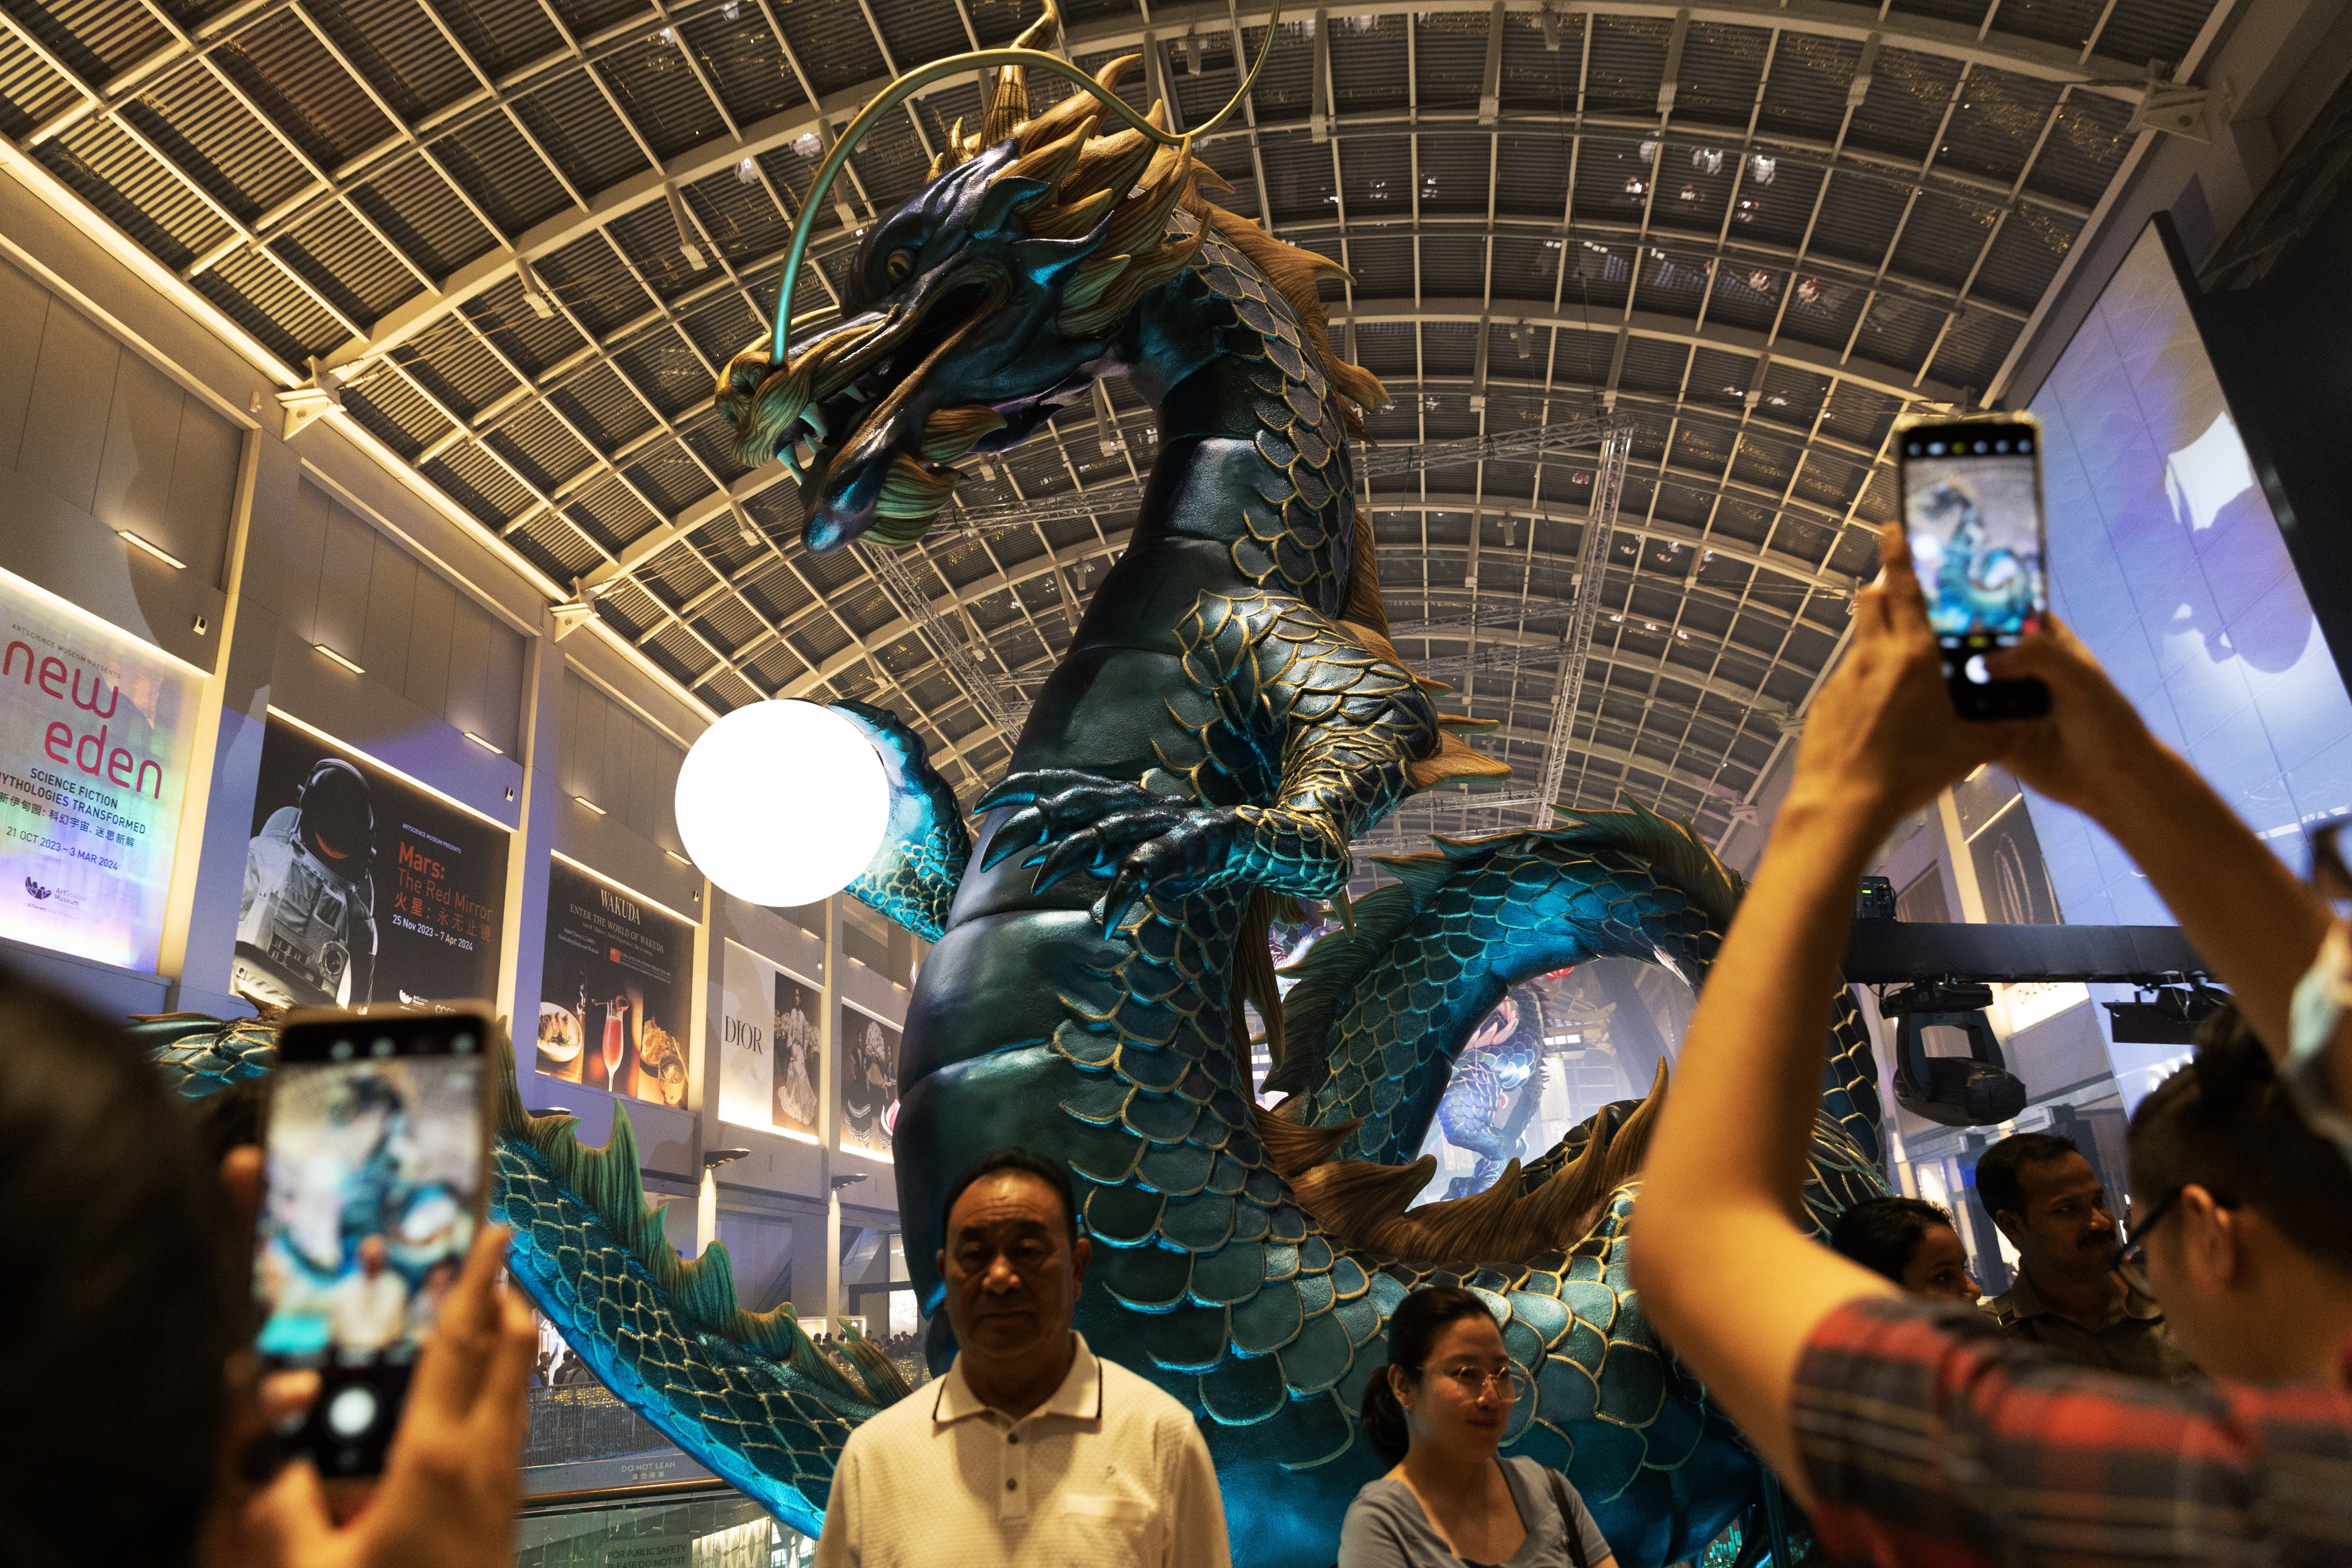 Marina Bay Sands’ dragon sculpture proved a popular photo spot for visitors to Singapore over the Lunar New Year break. Photo: EPA-EFE